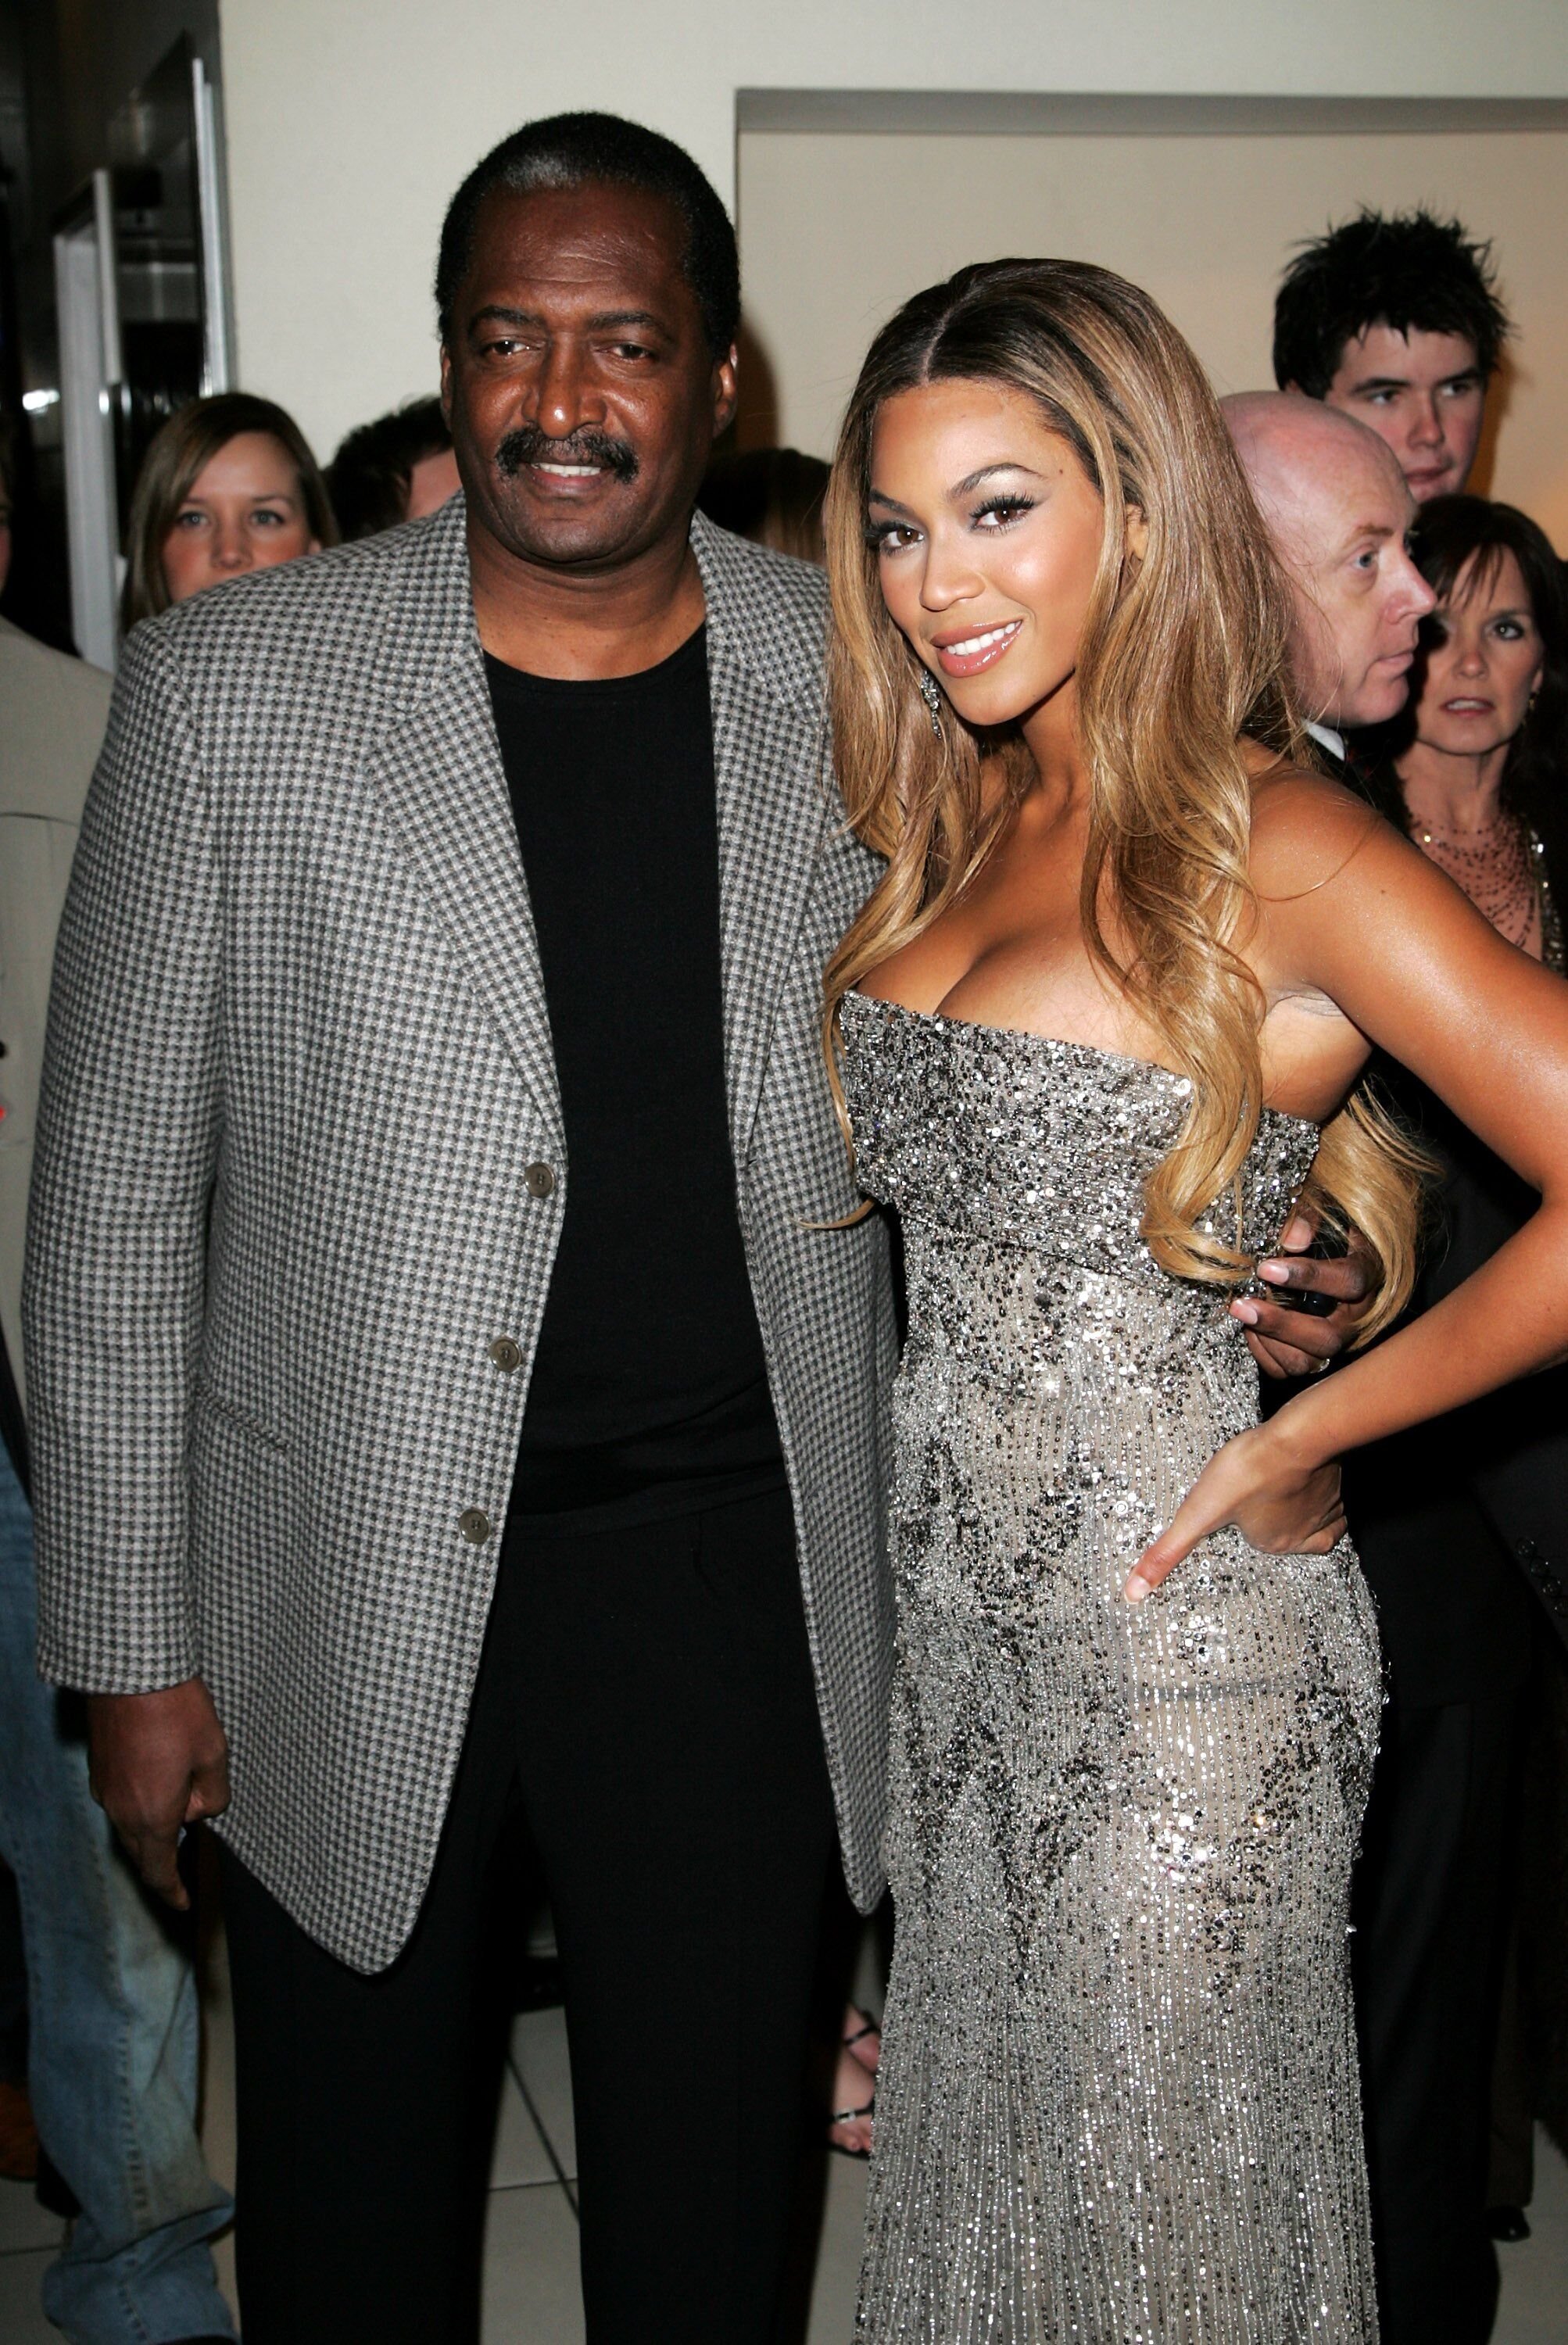 Mathew Knowles and Beyonce attend a formal event together | Source: Getty Images/GlobalImagesUkraine